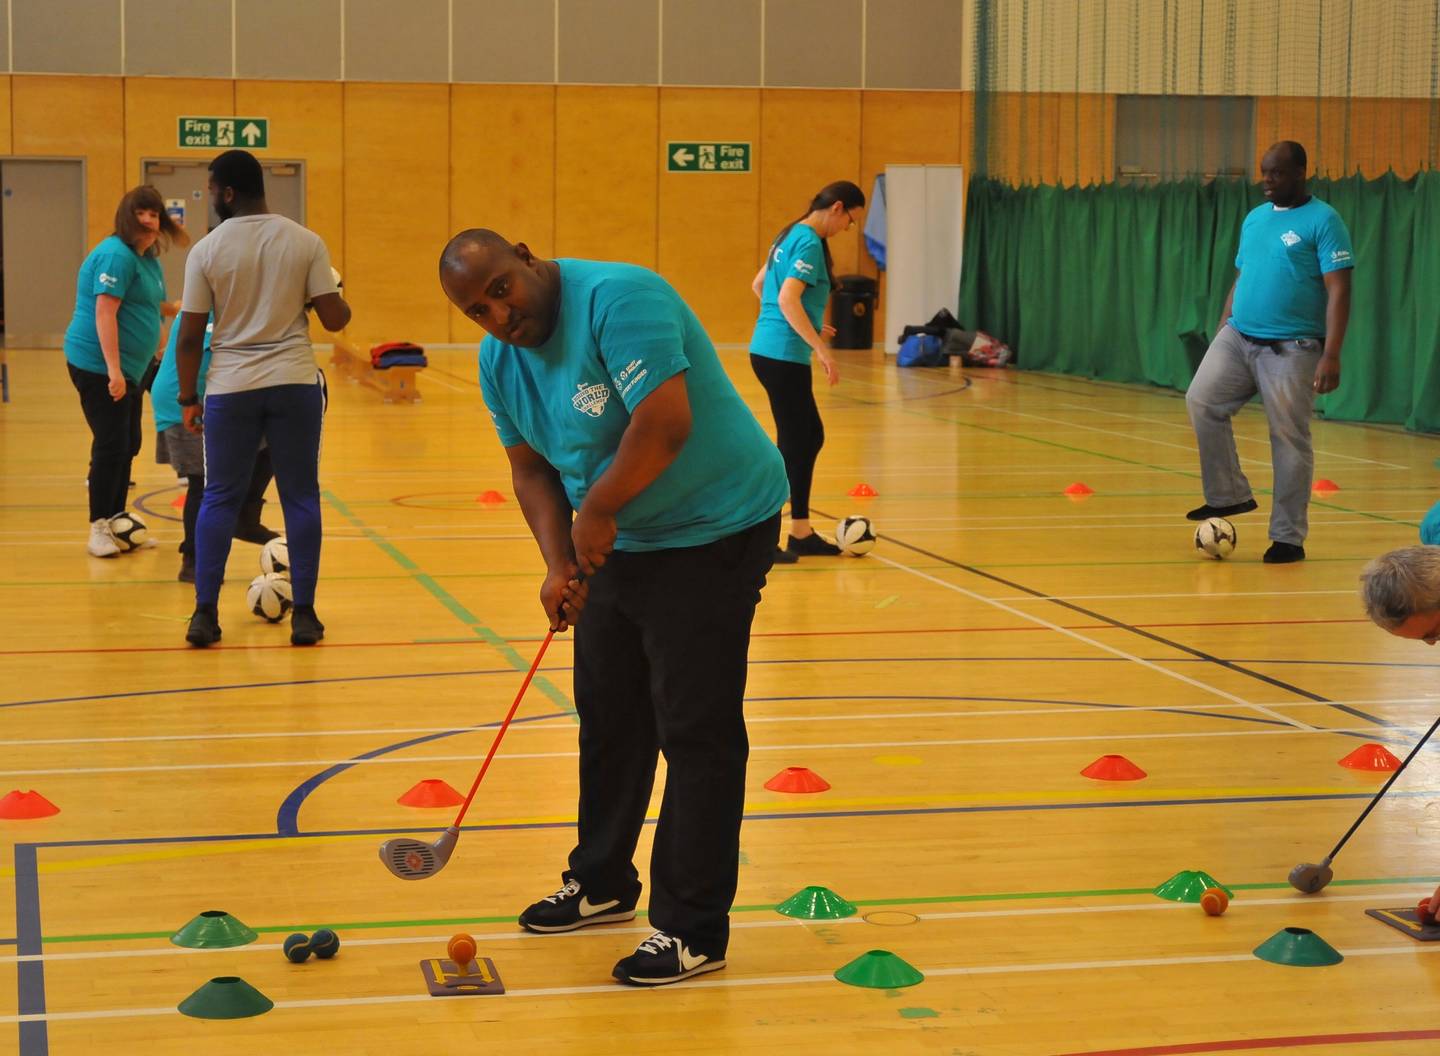 People with learning disabilities taking part in activities at Mencap round the world challenge